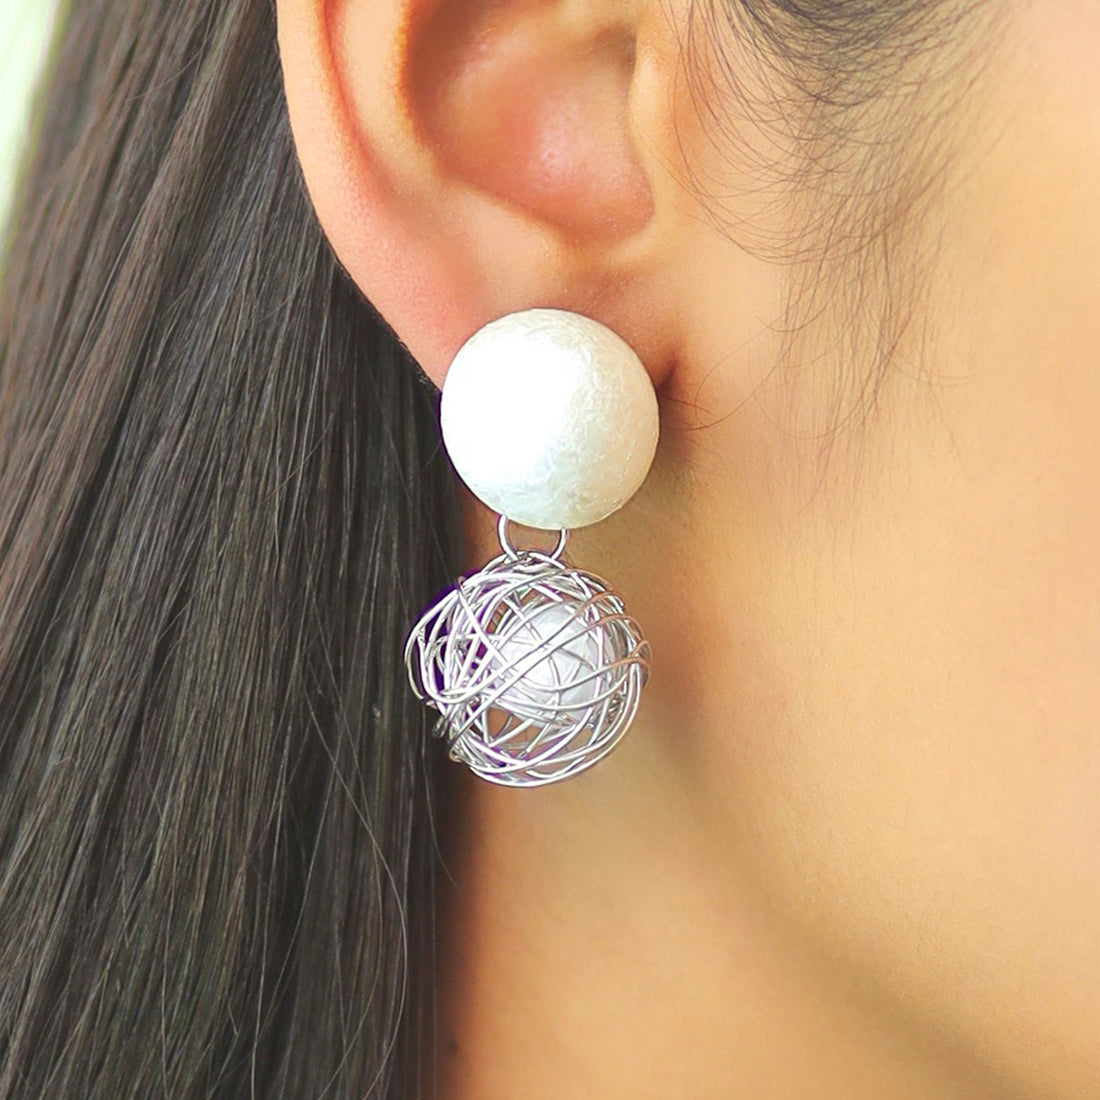 Quirky Silver-Toned Short Pearl Drop Earrings